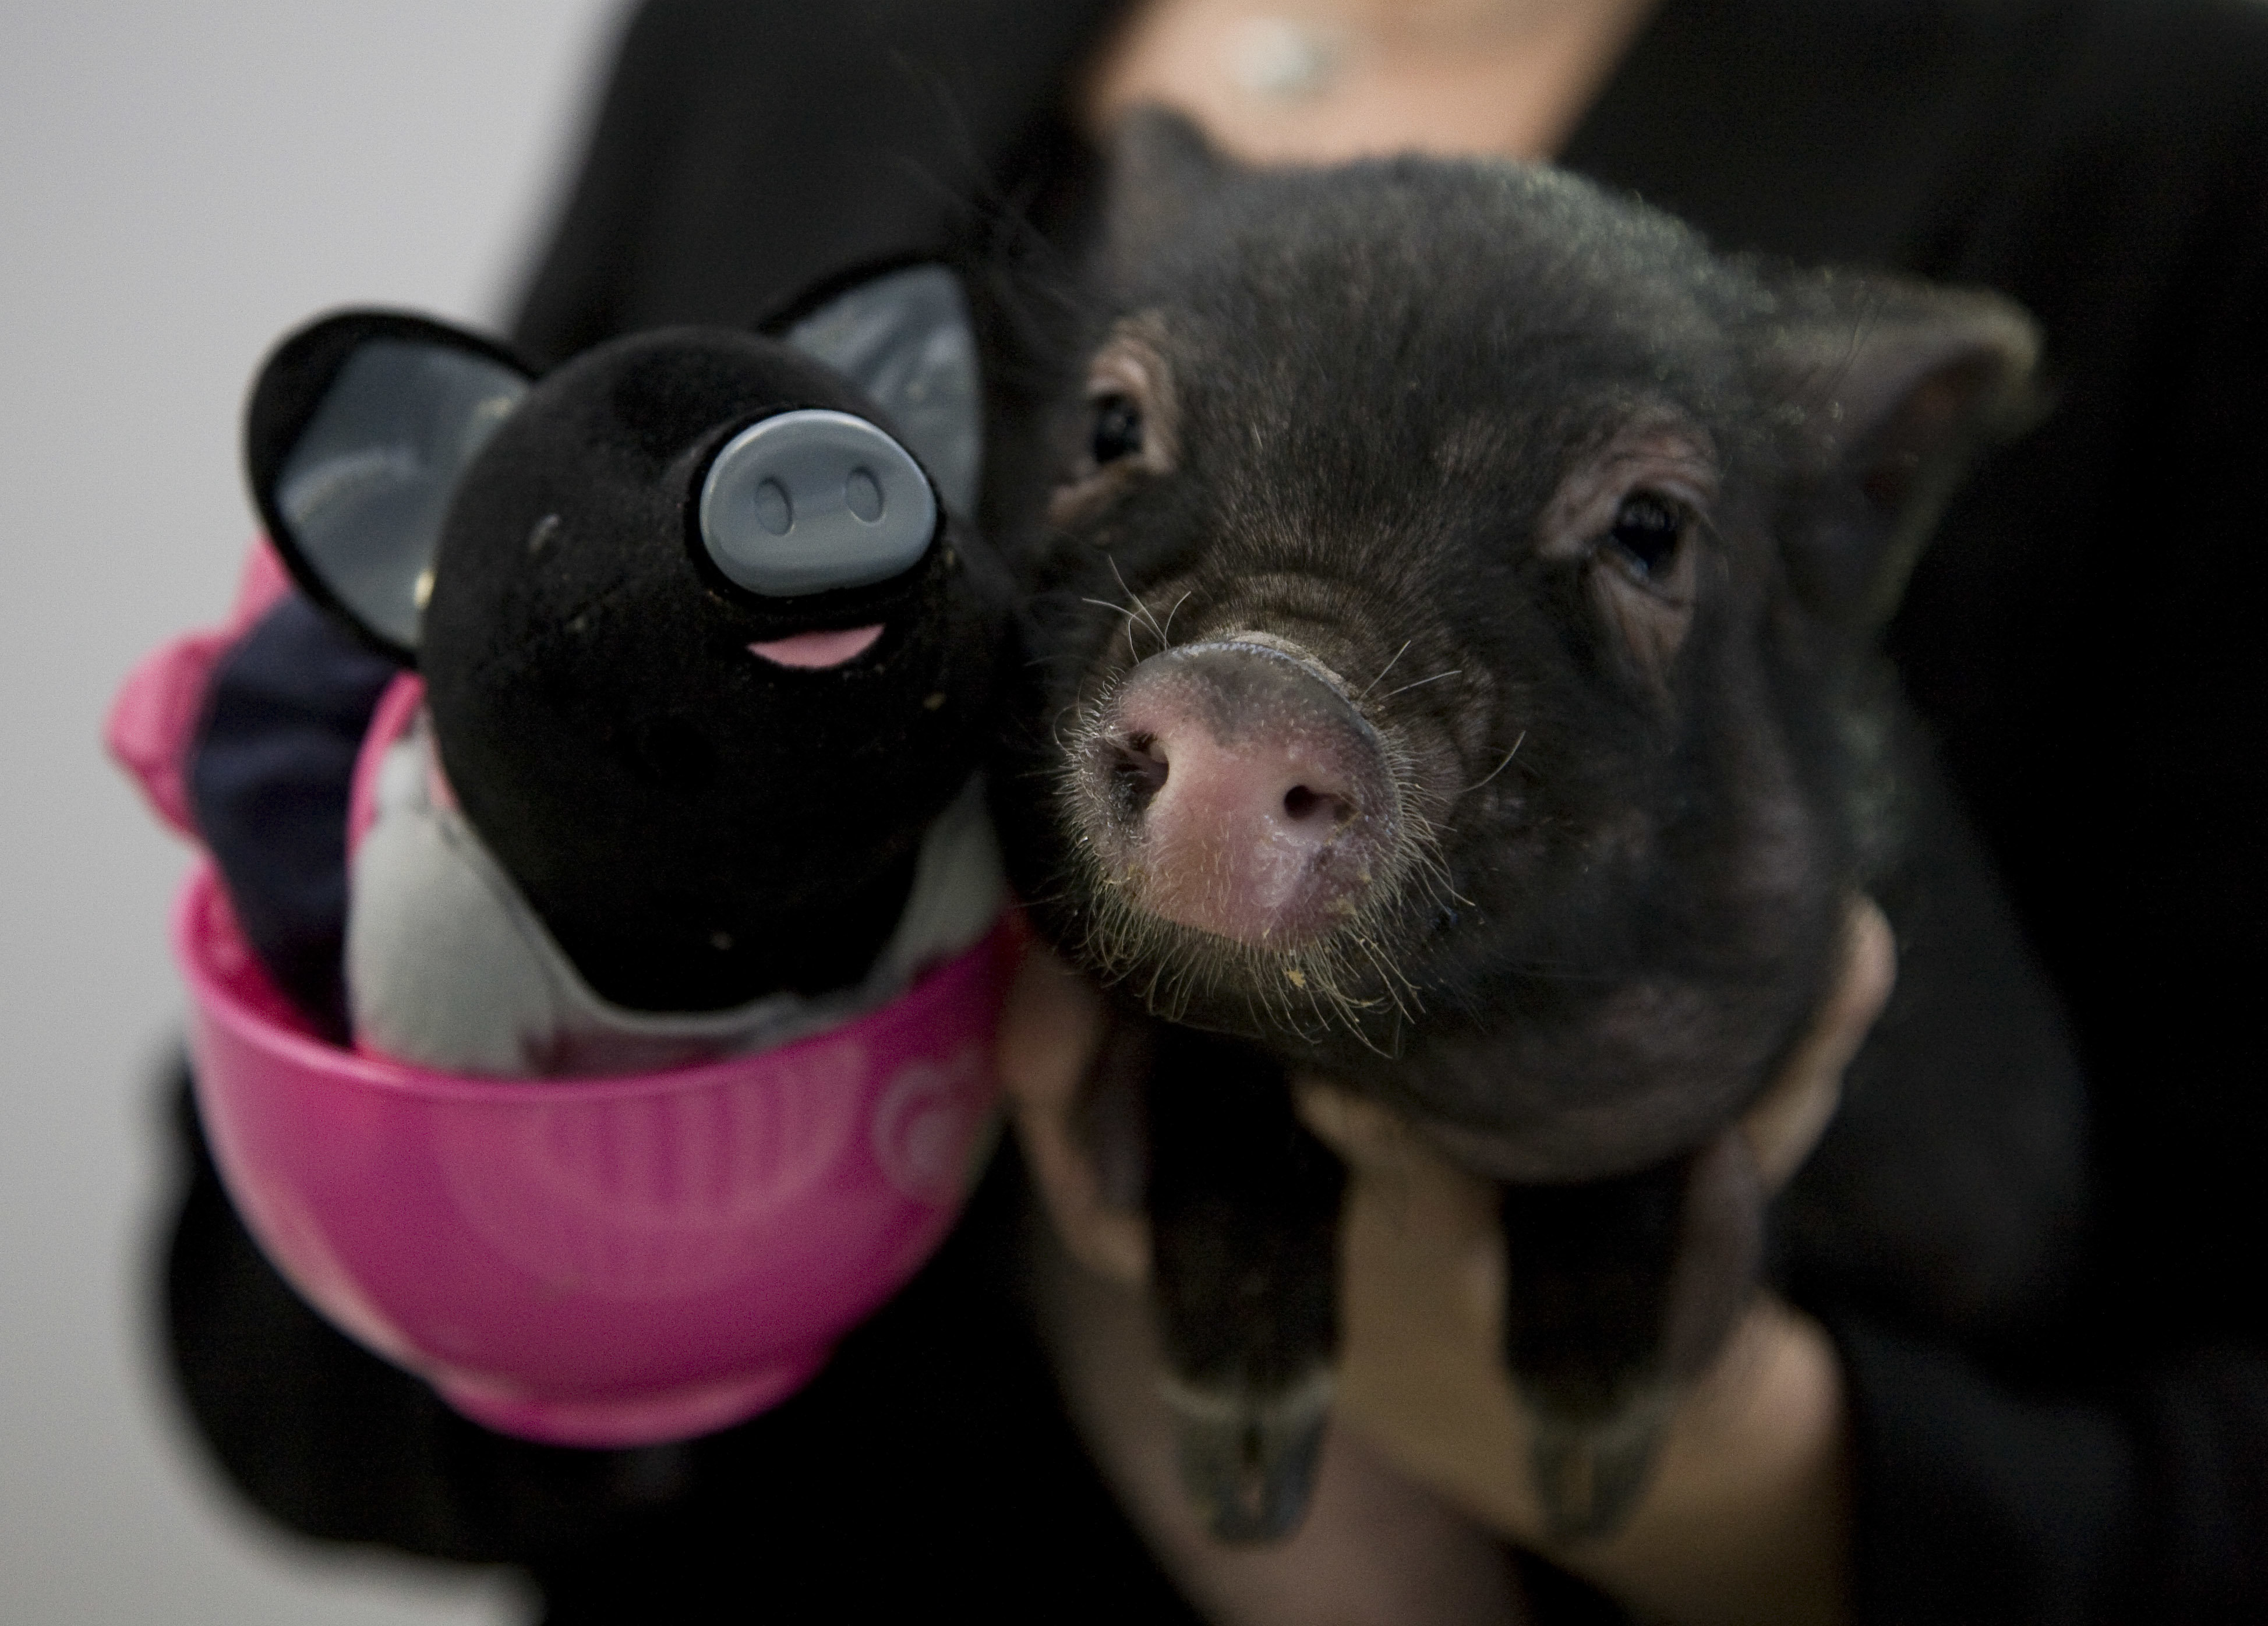 teacup pigs for sale